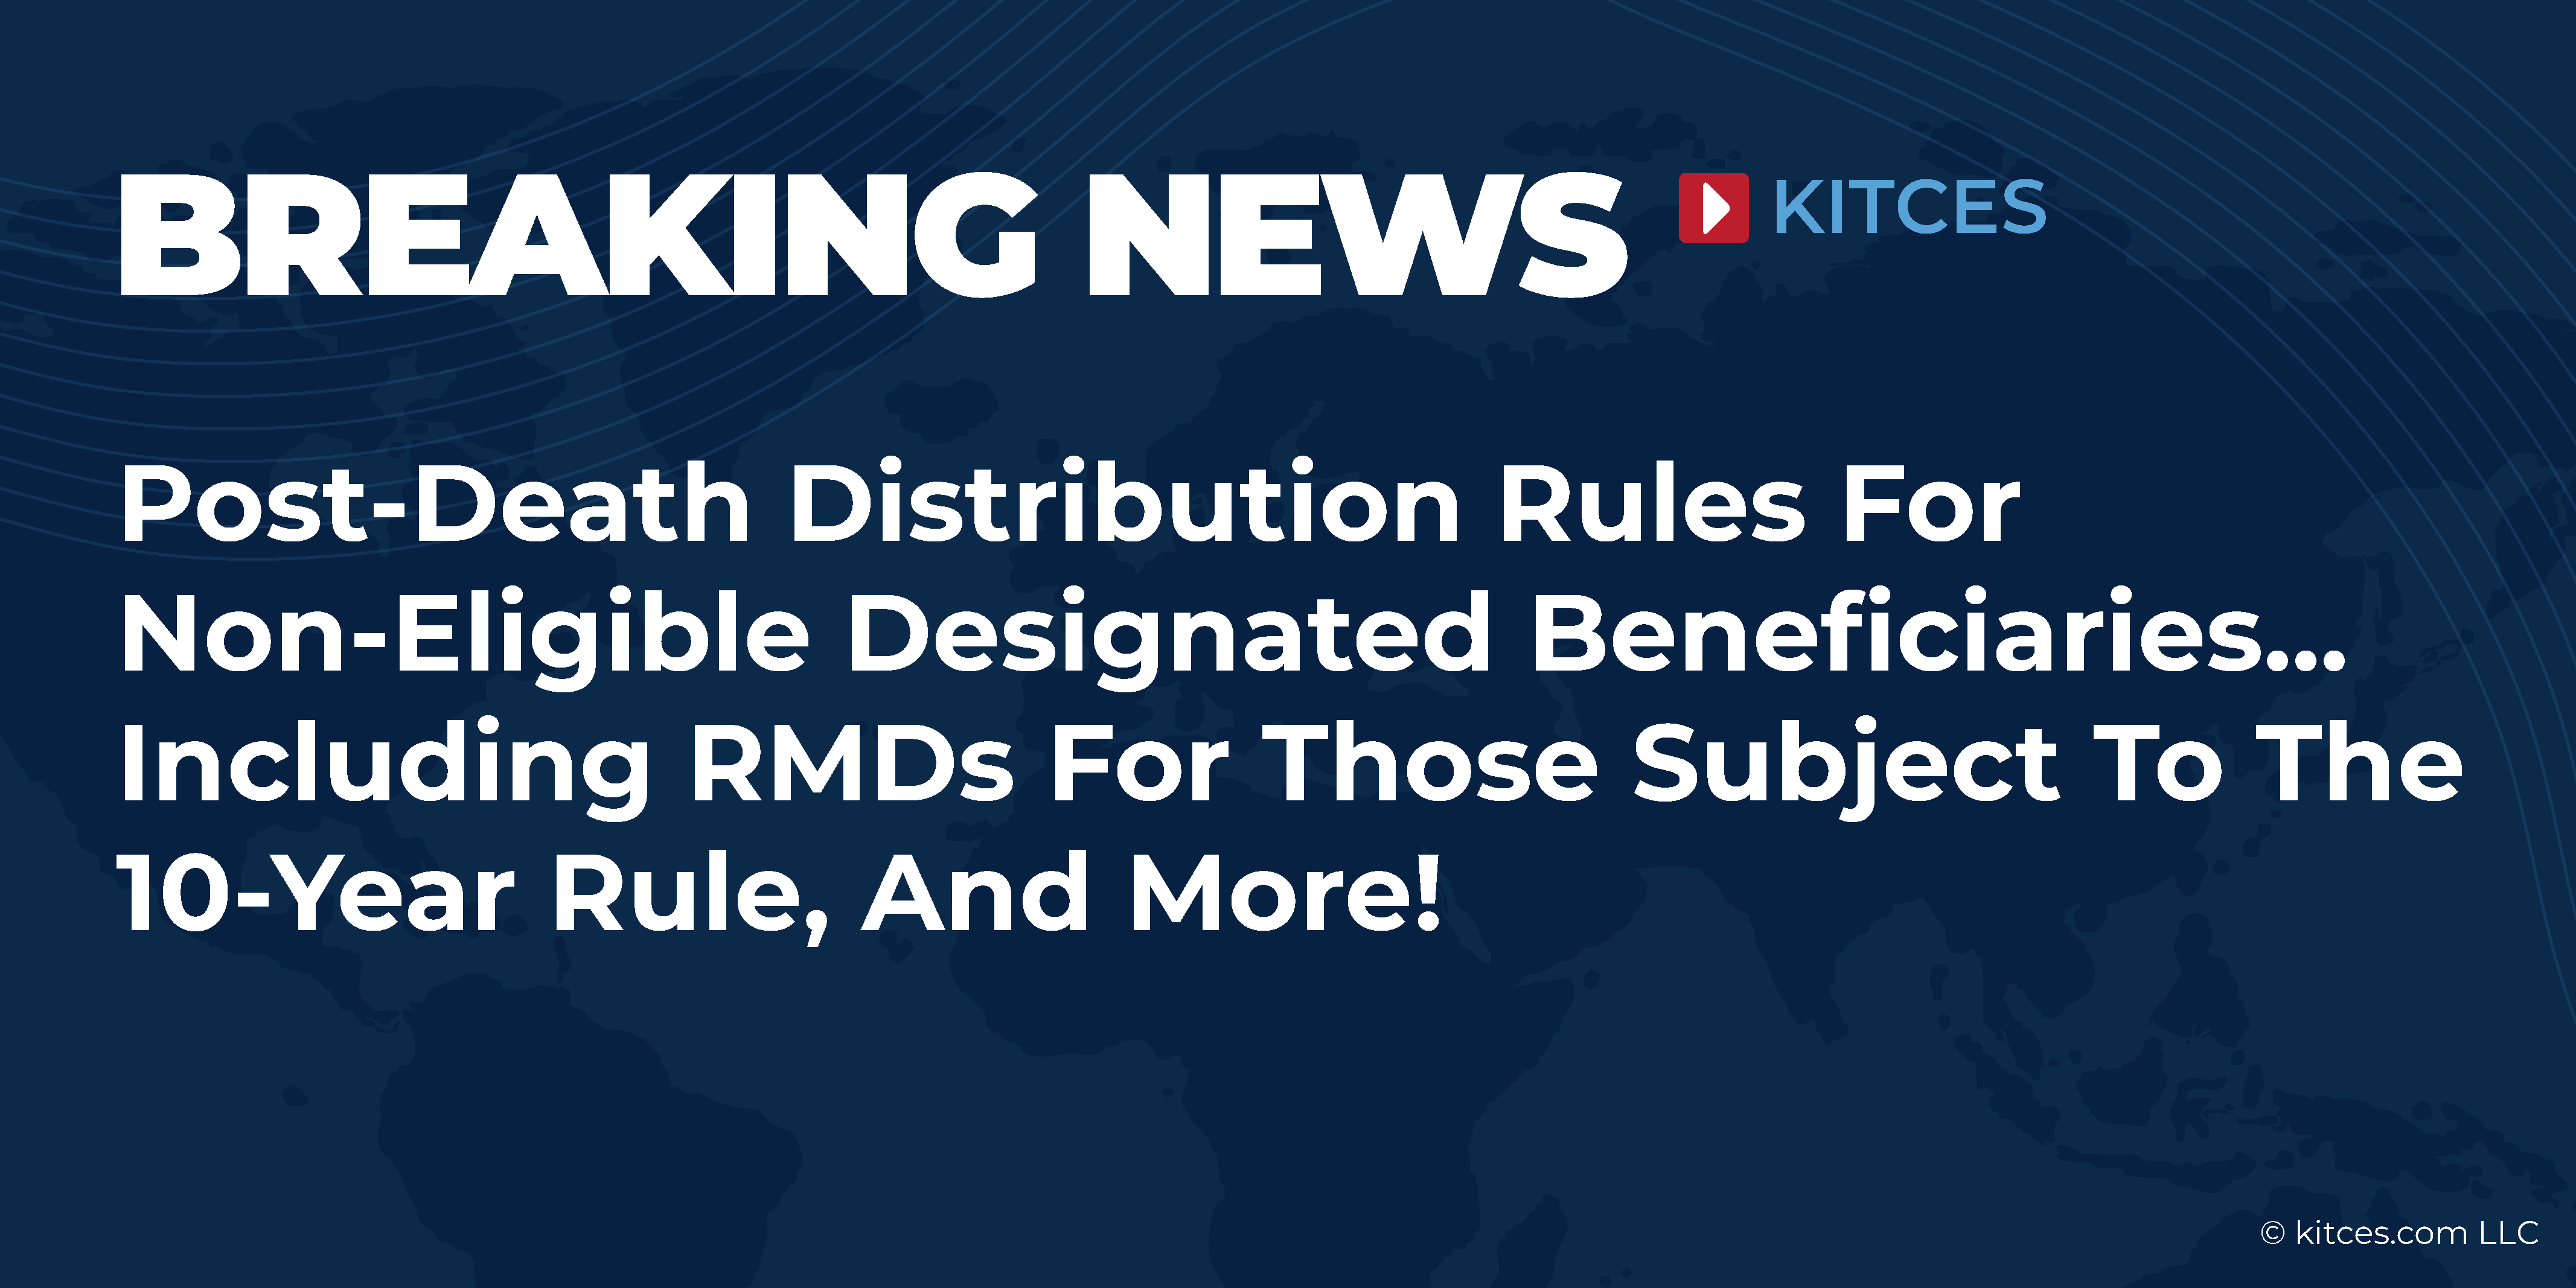 Understanding the IRS’s Latest Regulations on Required Minimum Distributions: Key Changes for Trust Beneficiaries, Spousal Beneficiaries, Annuities, and More